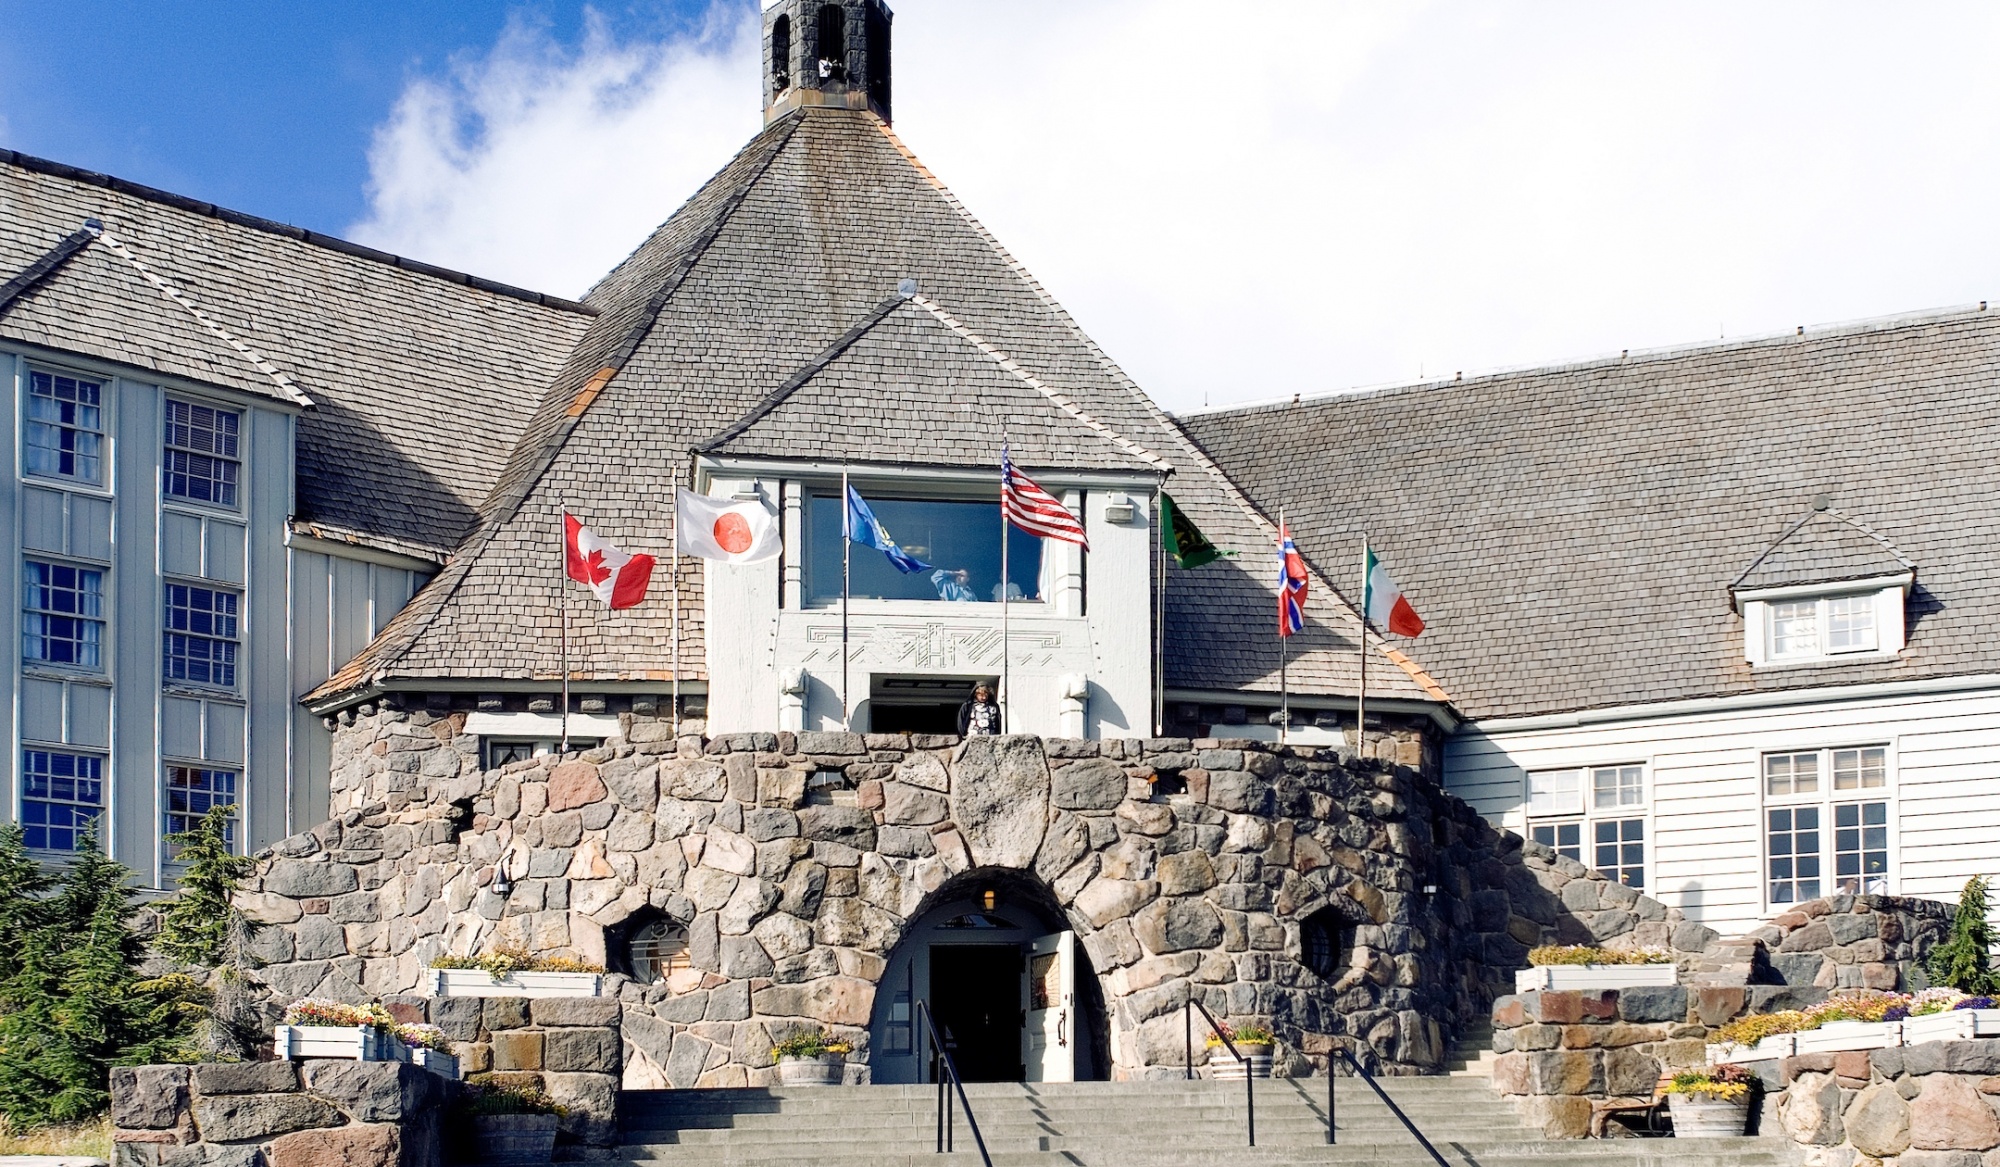 awesome movie locations, The Shining, Timberline Lodge, Oregon